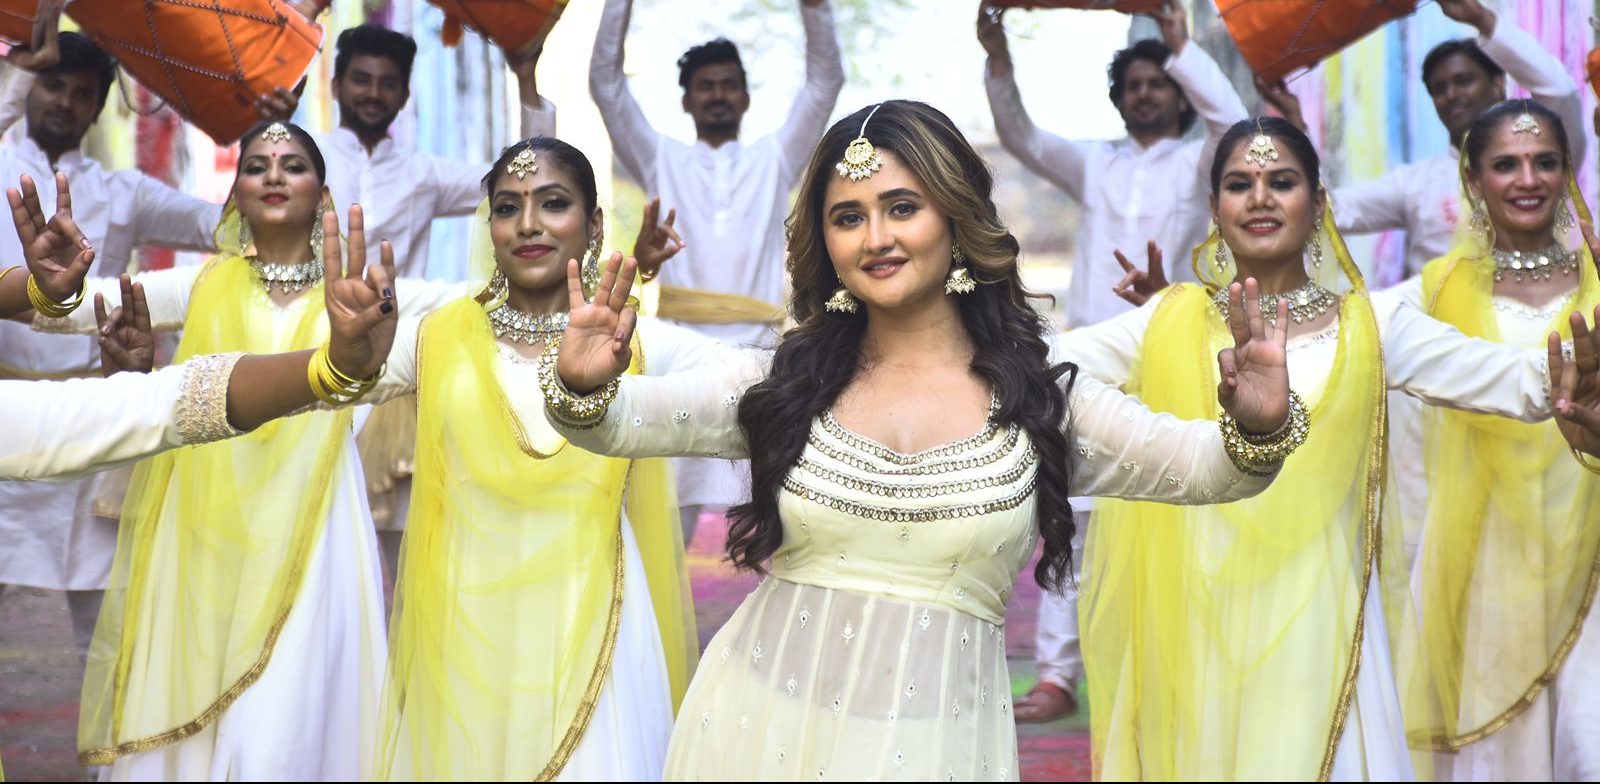 About ‘Biraj Mein Jhoom’, Rashami Desai says, “To be part of something so spiritual and creative is a great opportunity for me”!